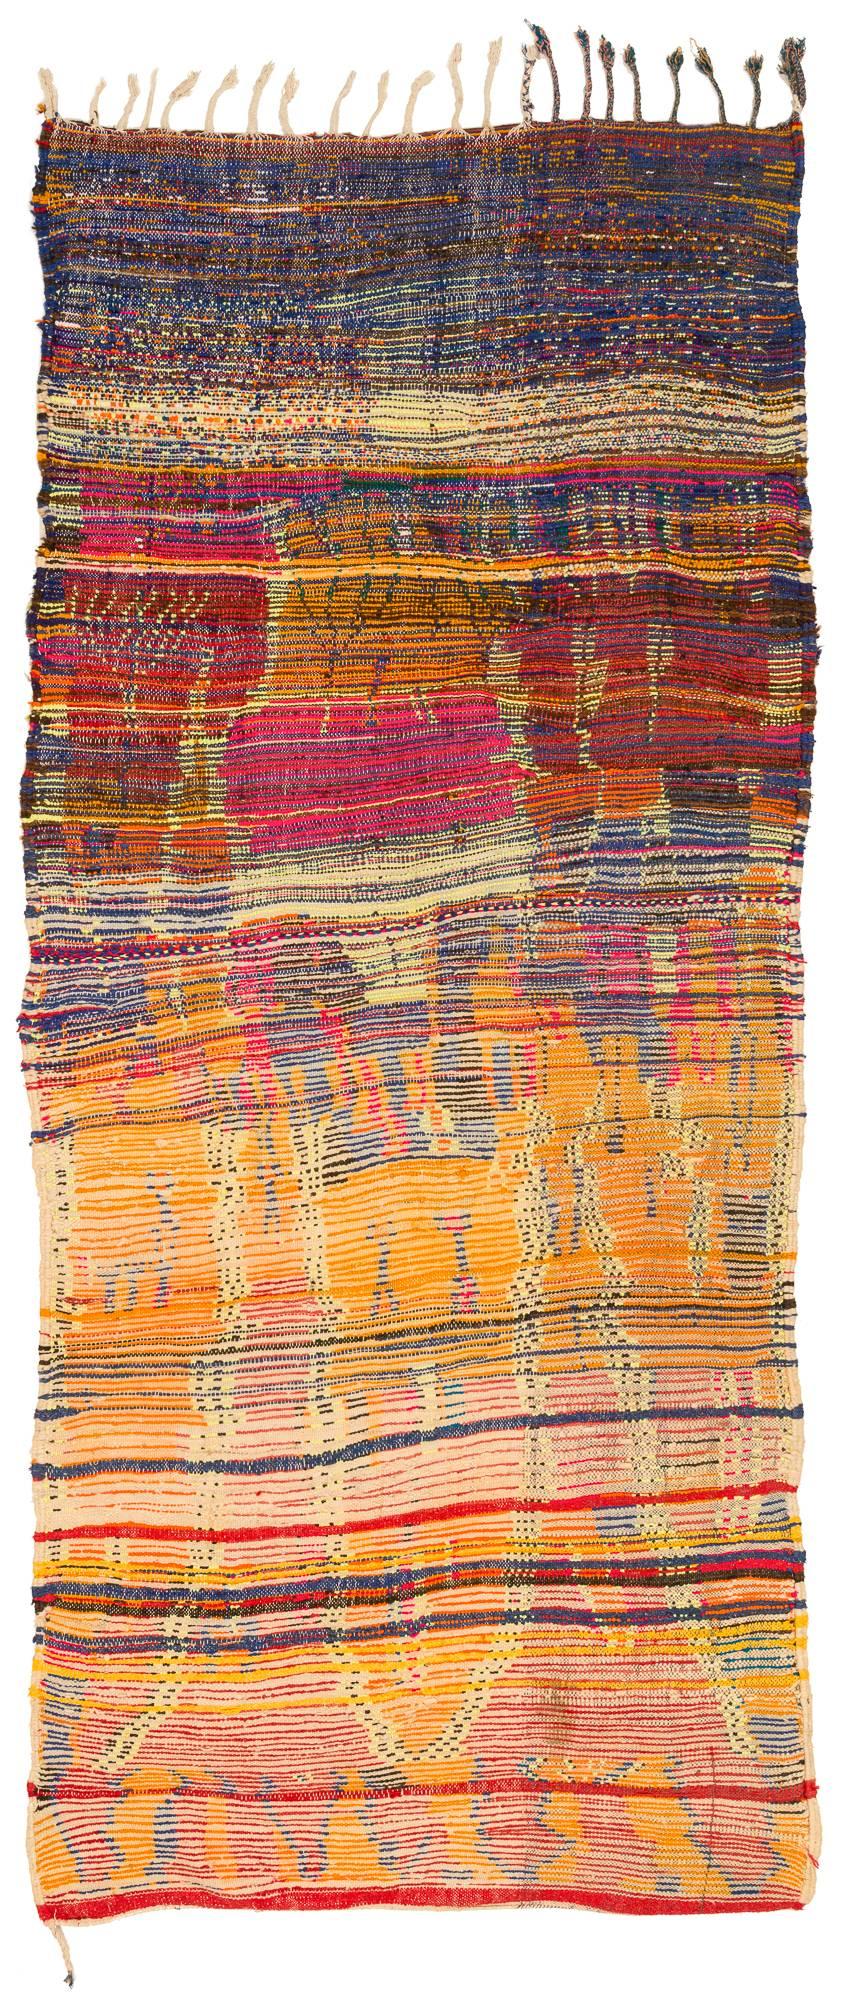 We love this funkily colored and designed rug. Not a very old rug but made for home use. This rug has the feeling of an authentically made tribal rug that has not been woven for the commercial market. An amazingly crazy spirit was the author of this